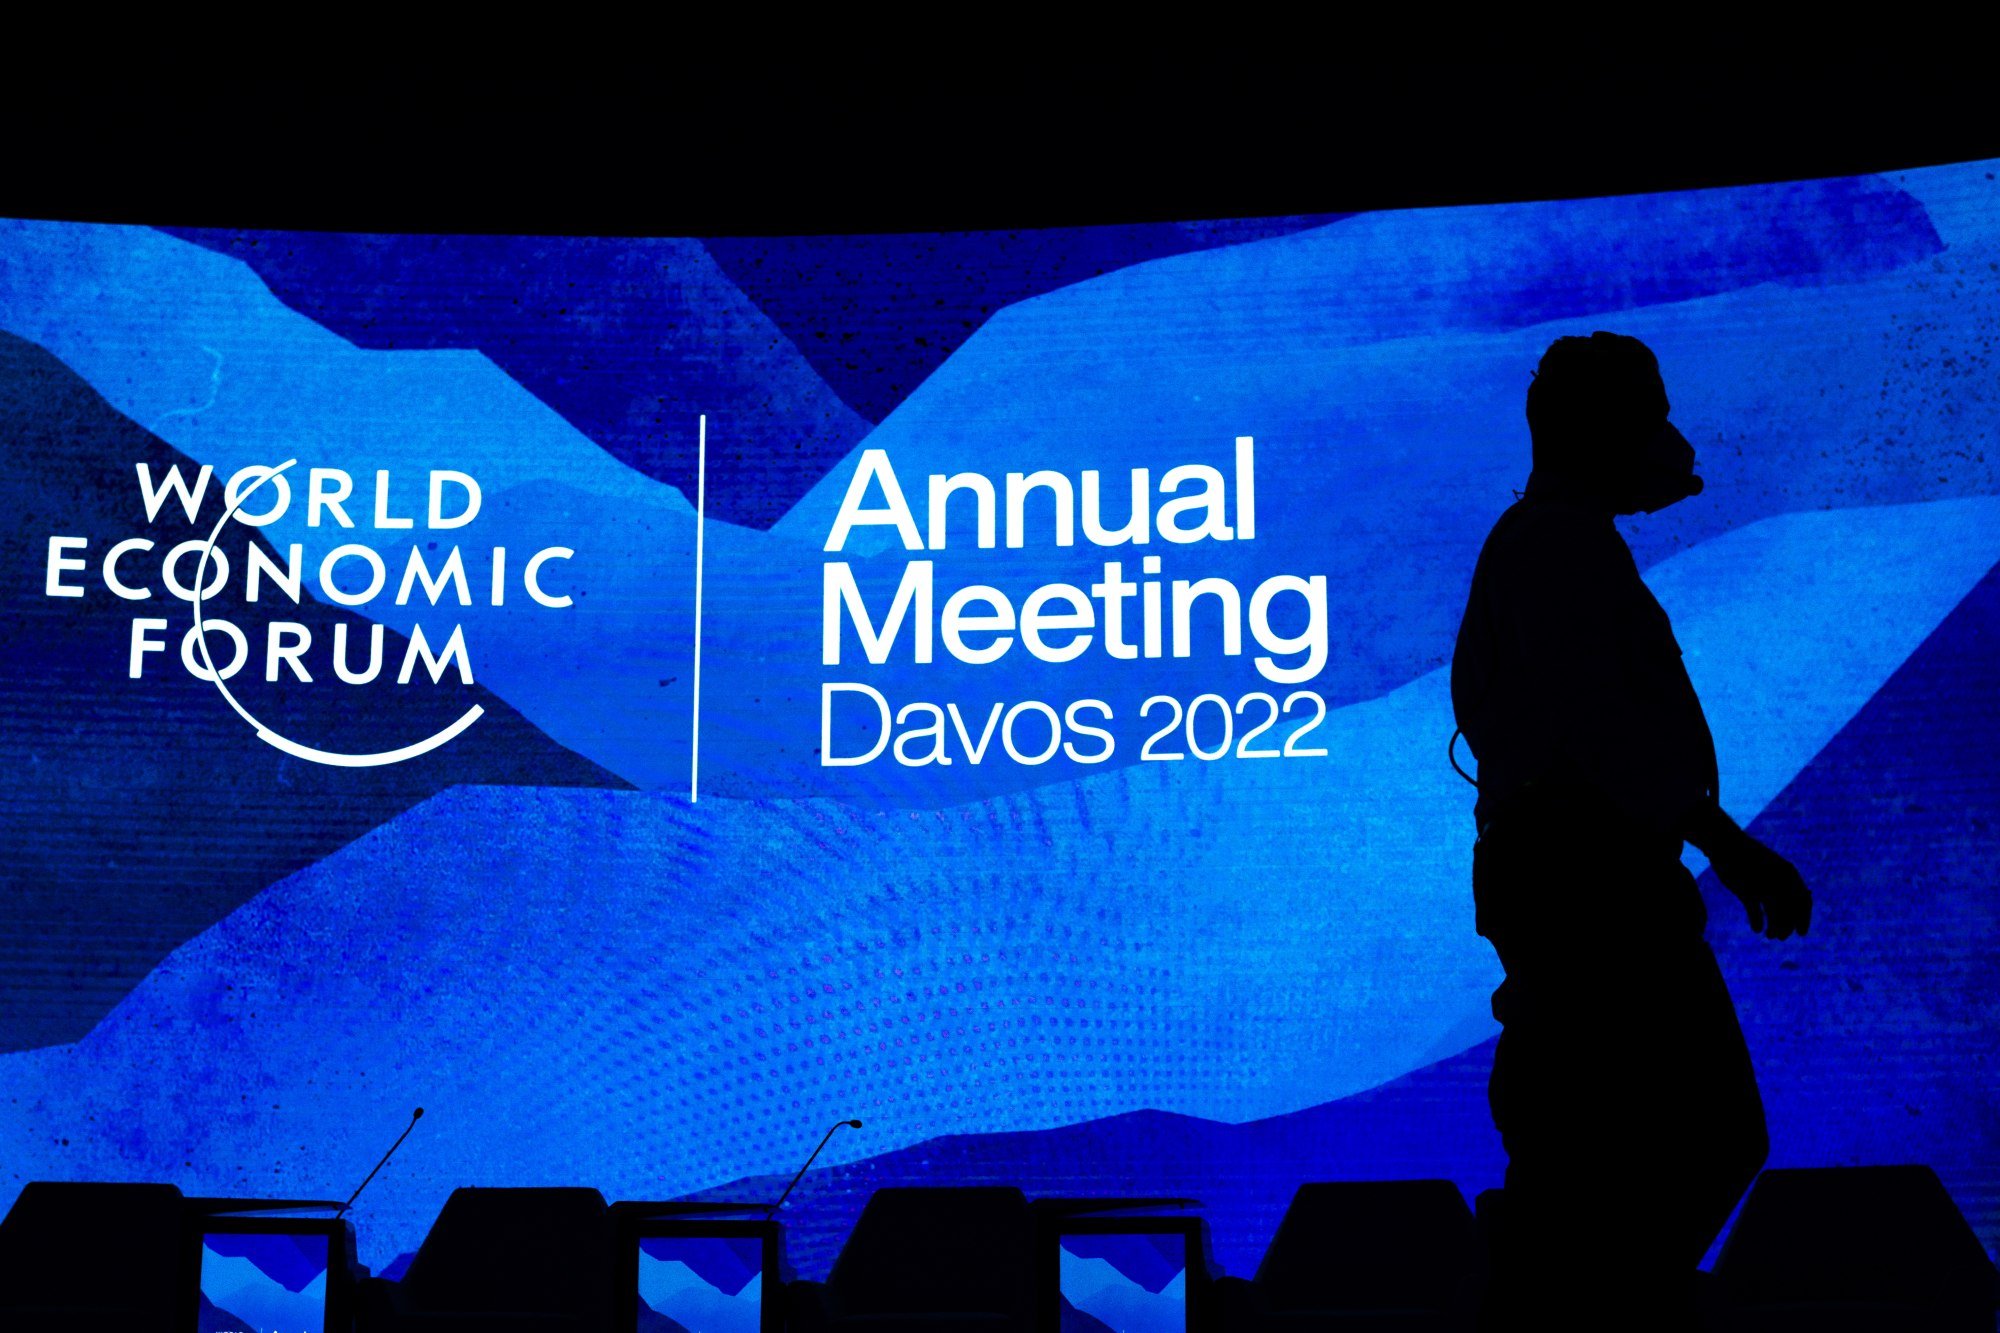 The annual meeting of the World Economic Forum started in Davos, Switzerland, on Sunday, after being postponed due to the Covid-19 outbreak. Photo: EPA-EFE